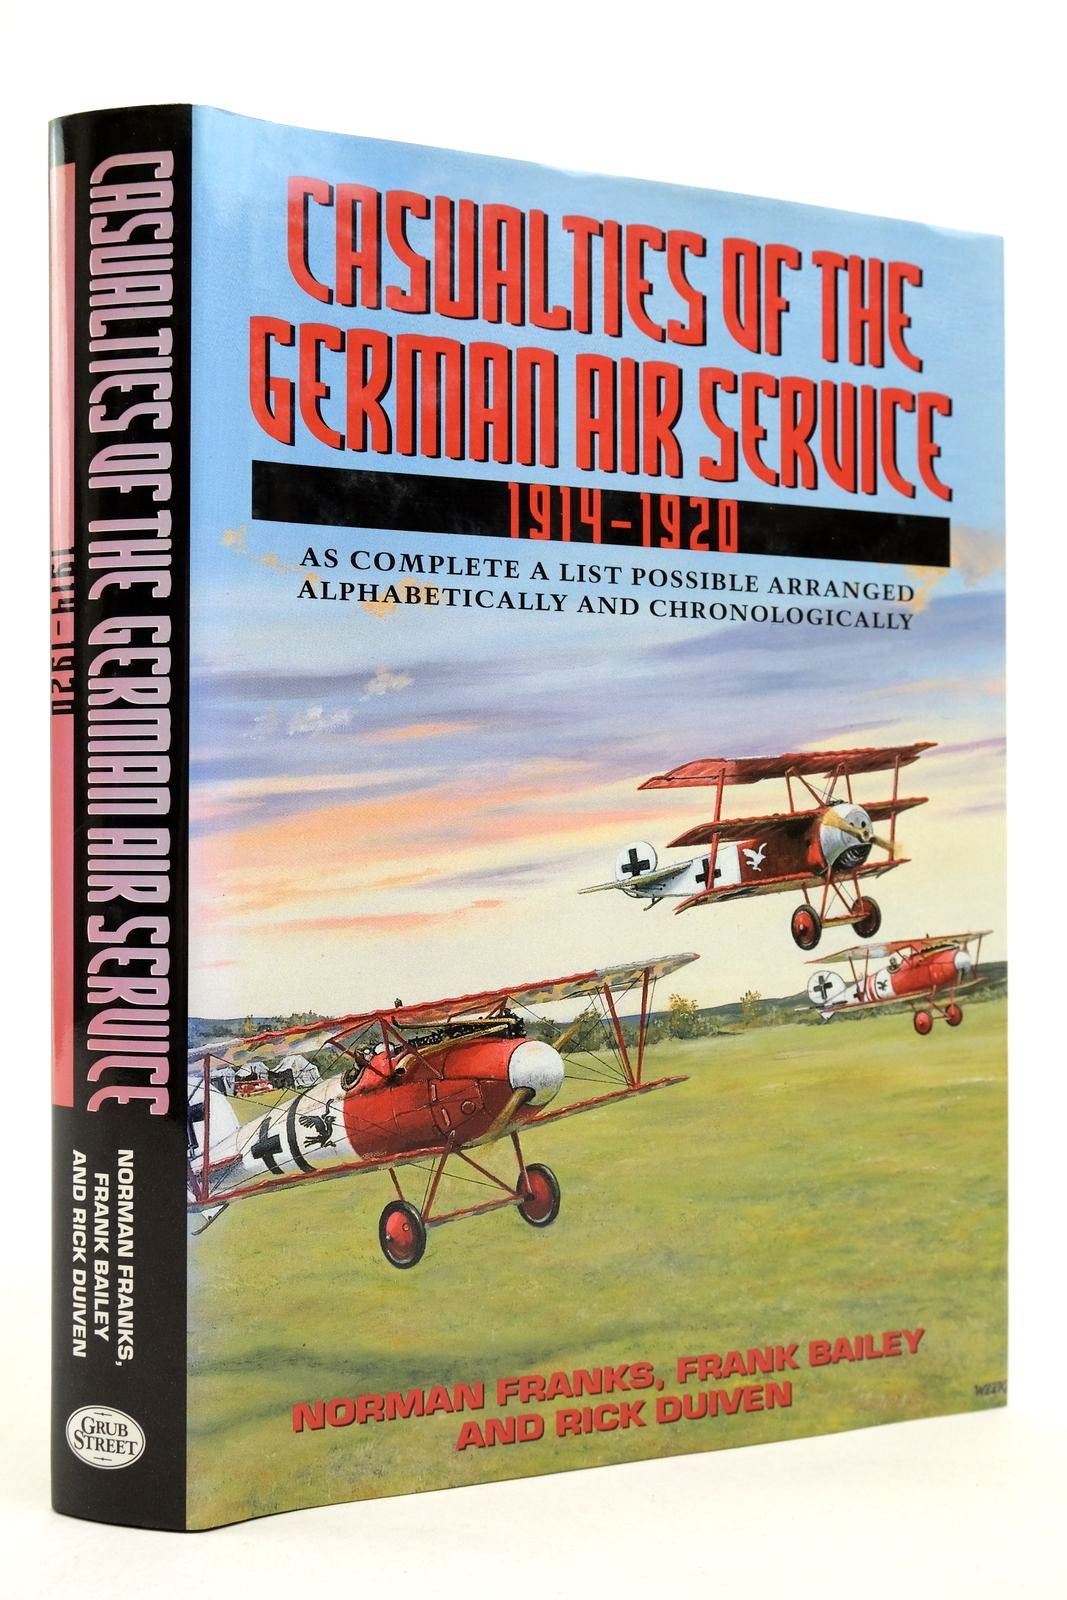 Photo of CASUALTIES OF THE GERMAN AIR SERVICE 1914-1920 written by Franks, Norman
Bailey, Frank
Duiven, Rick published by Grub Street (STOCK CODE: 2139946)  for sale by Stella & Rose's Books